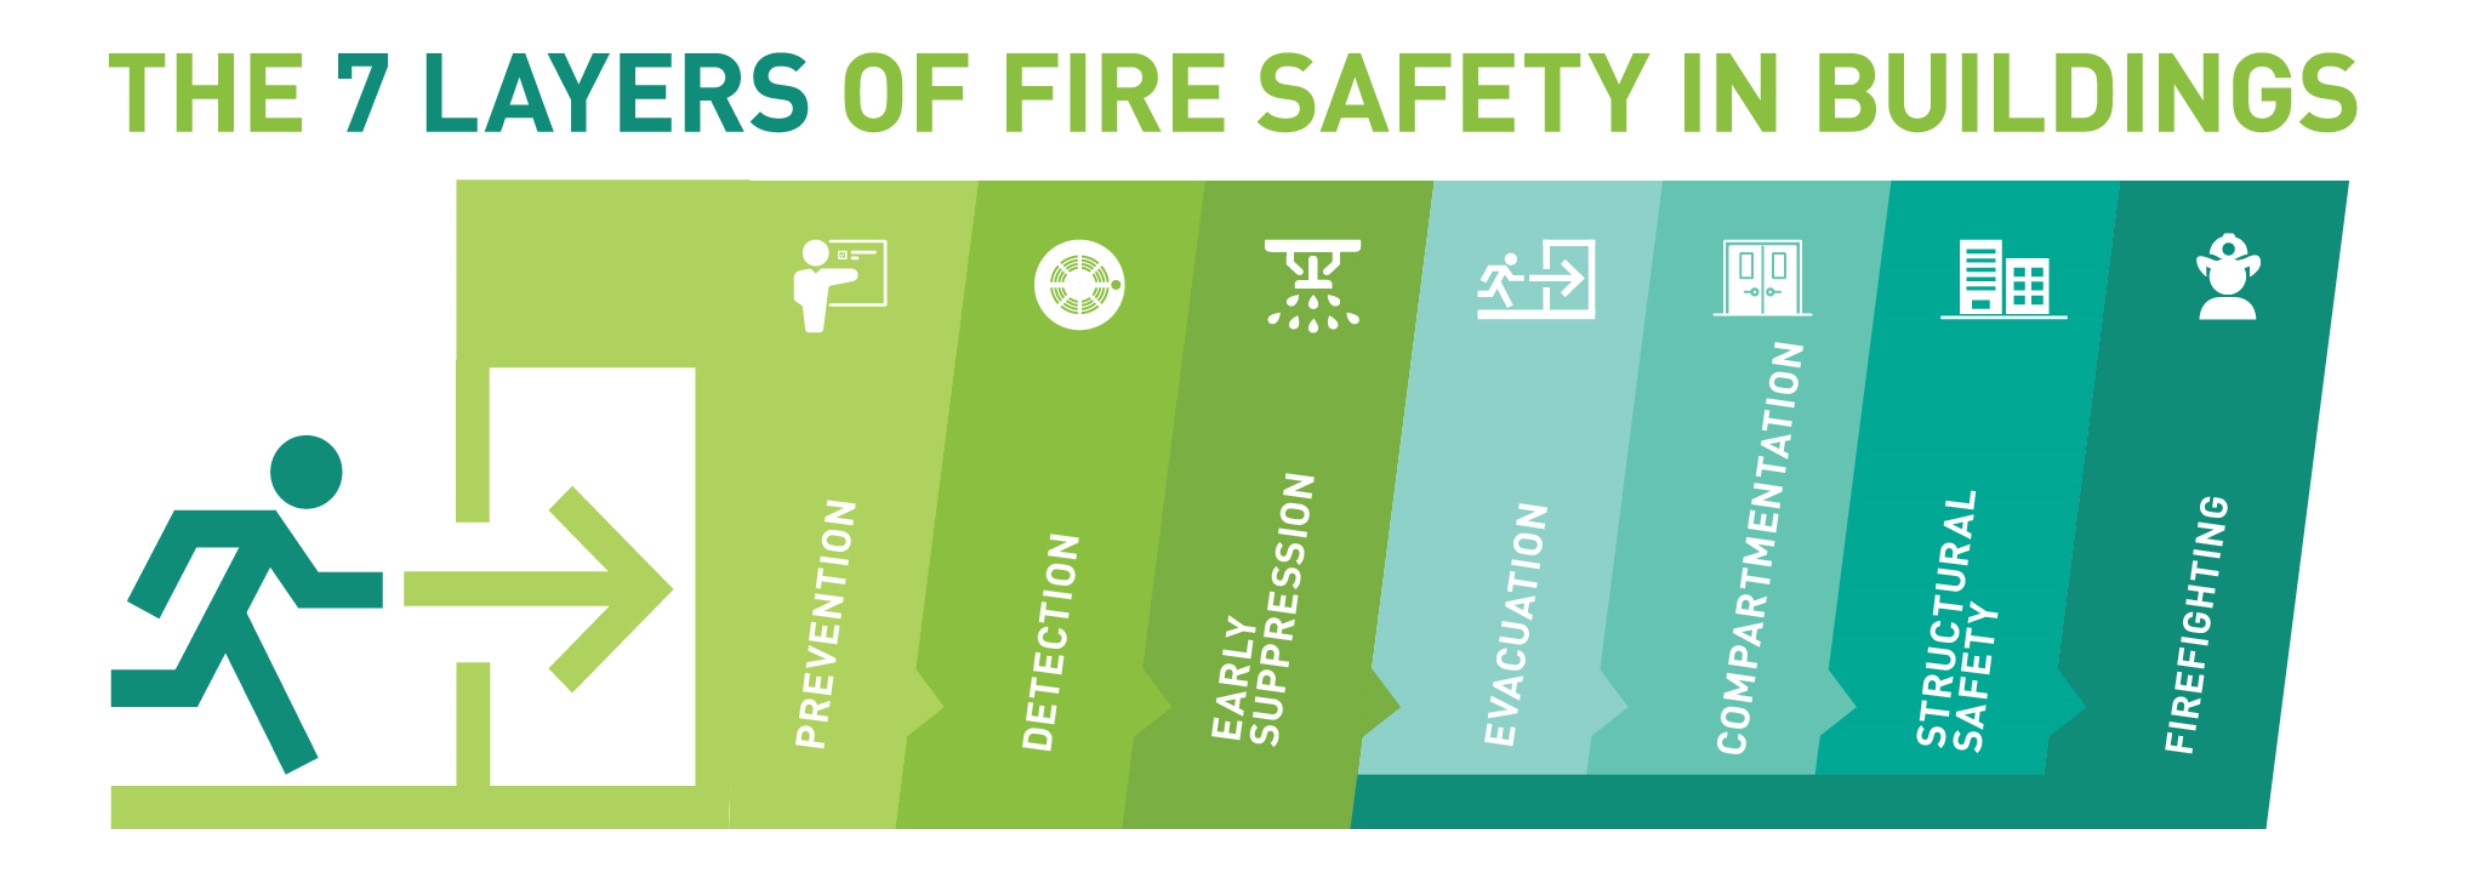 The EU Fire Safety Guide